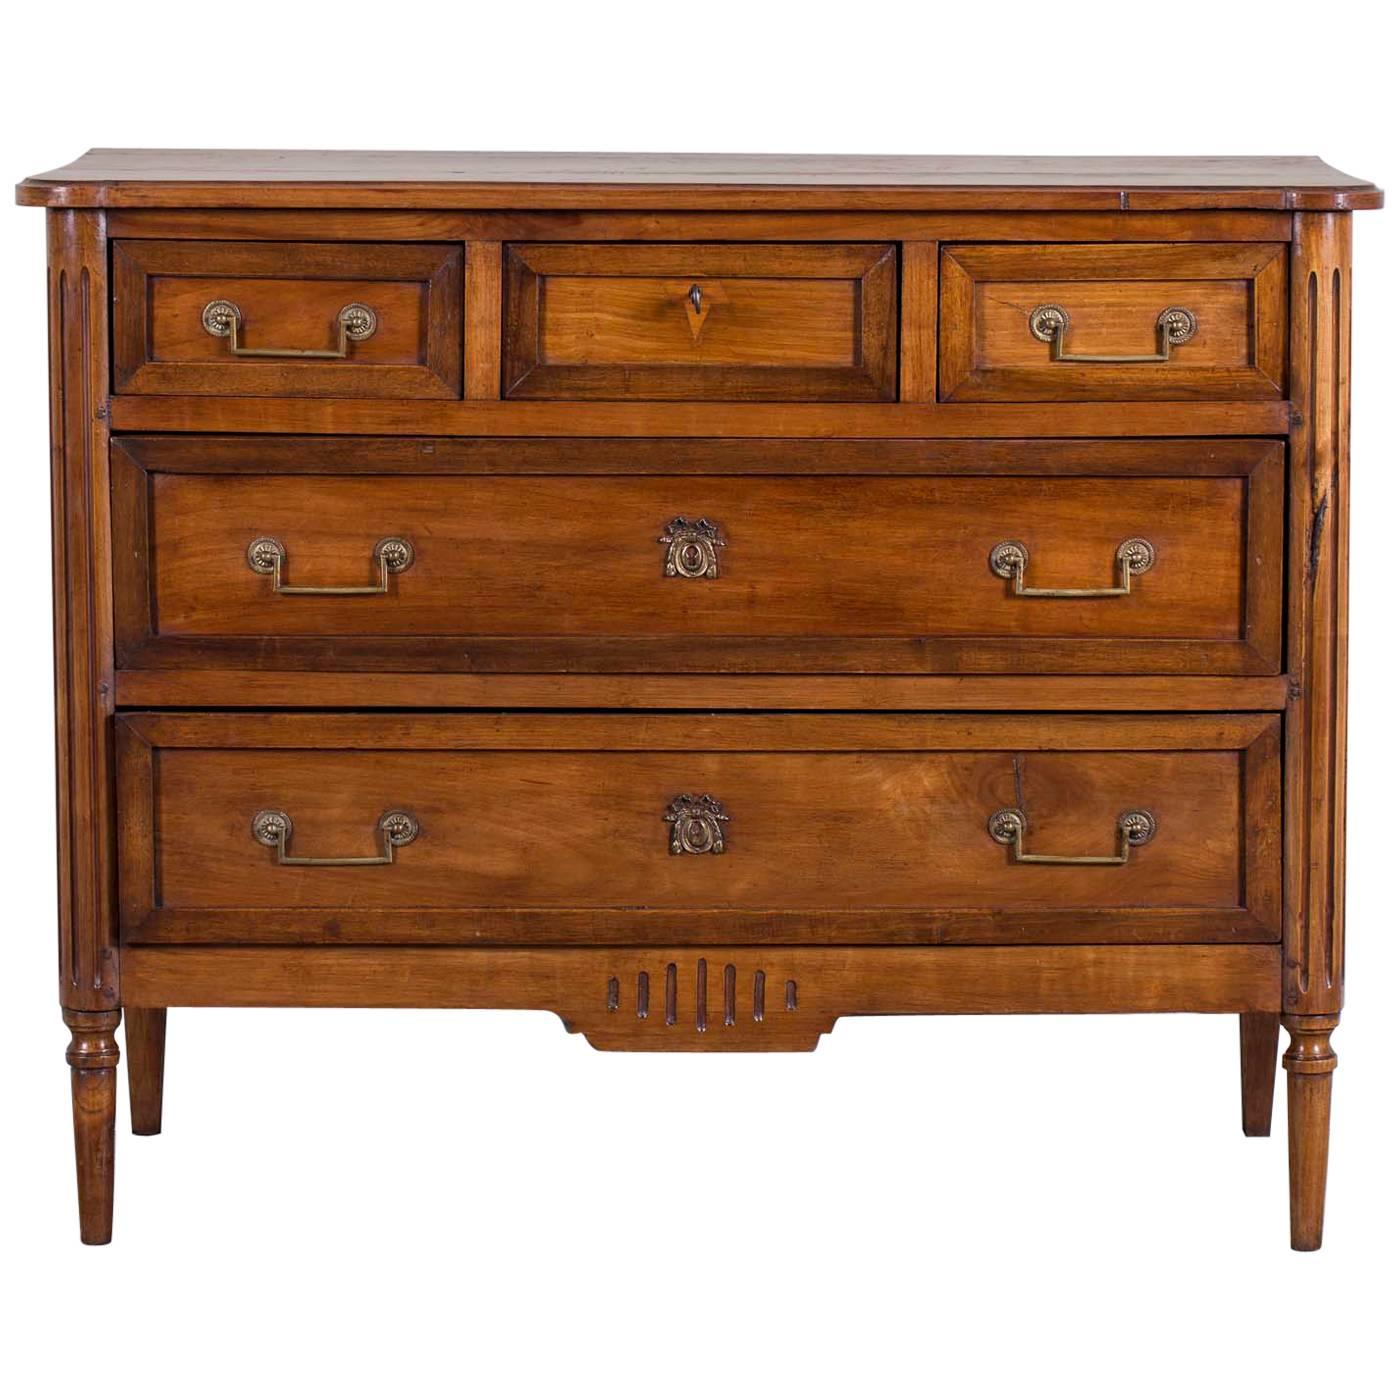 Antique French Louis XVI Walnut Chest of Drawers, circa 1790